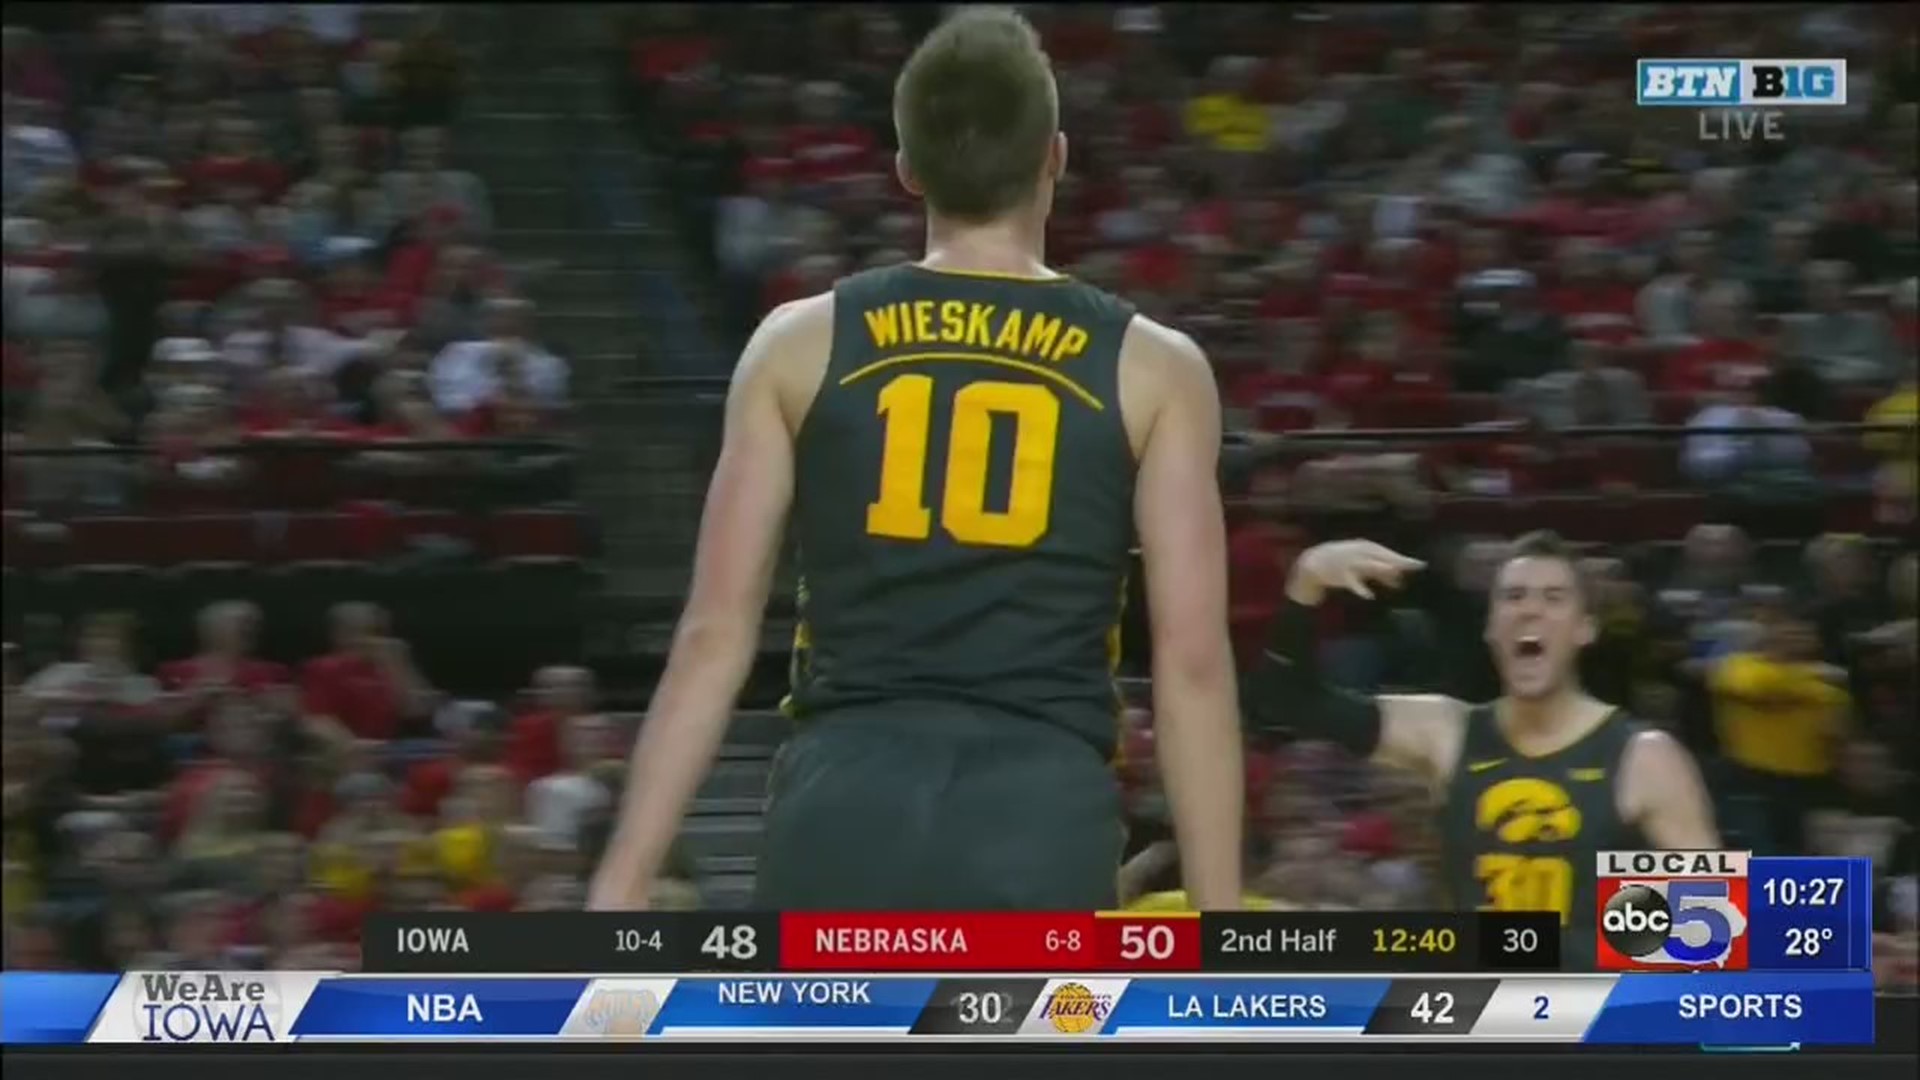 Iowa couldn't buy a bucket in the early-goings and Nebraska was able to hang on to beat the Hawkeyes.